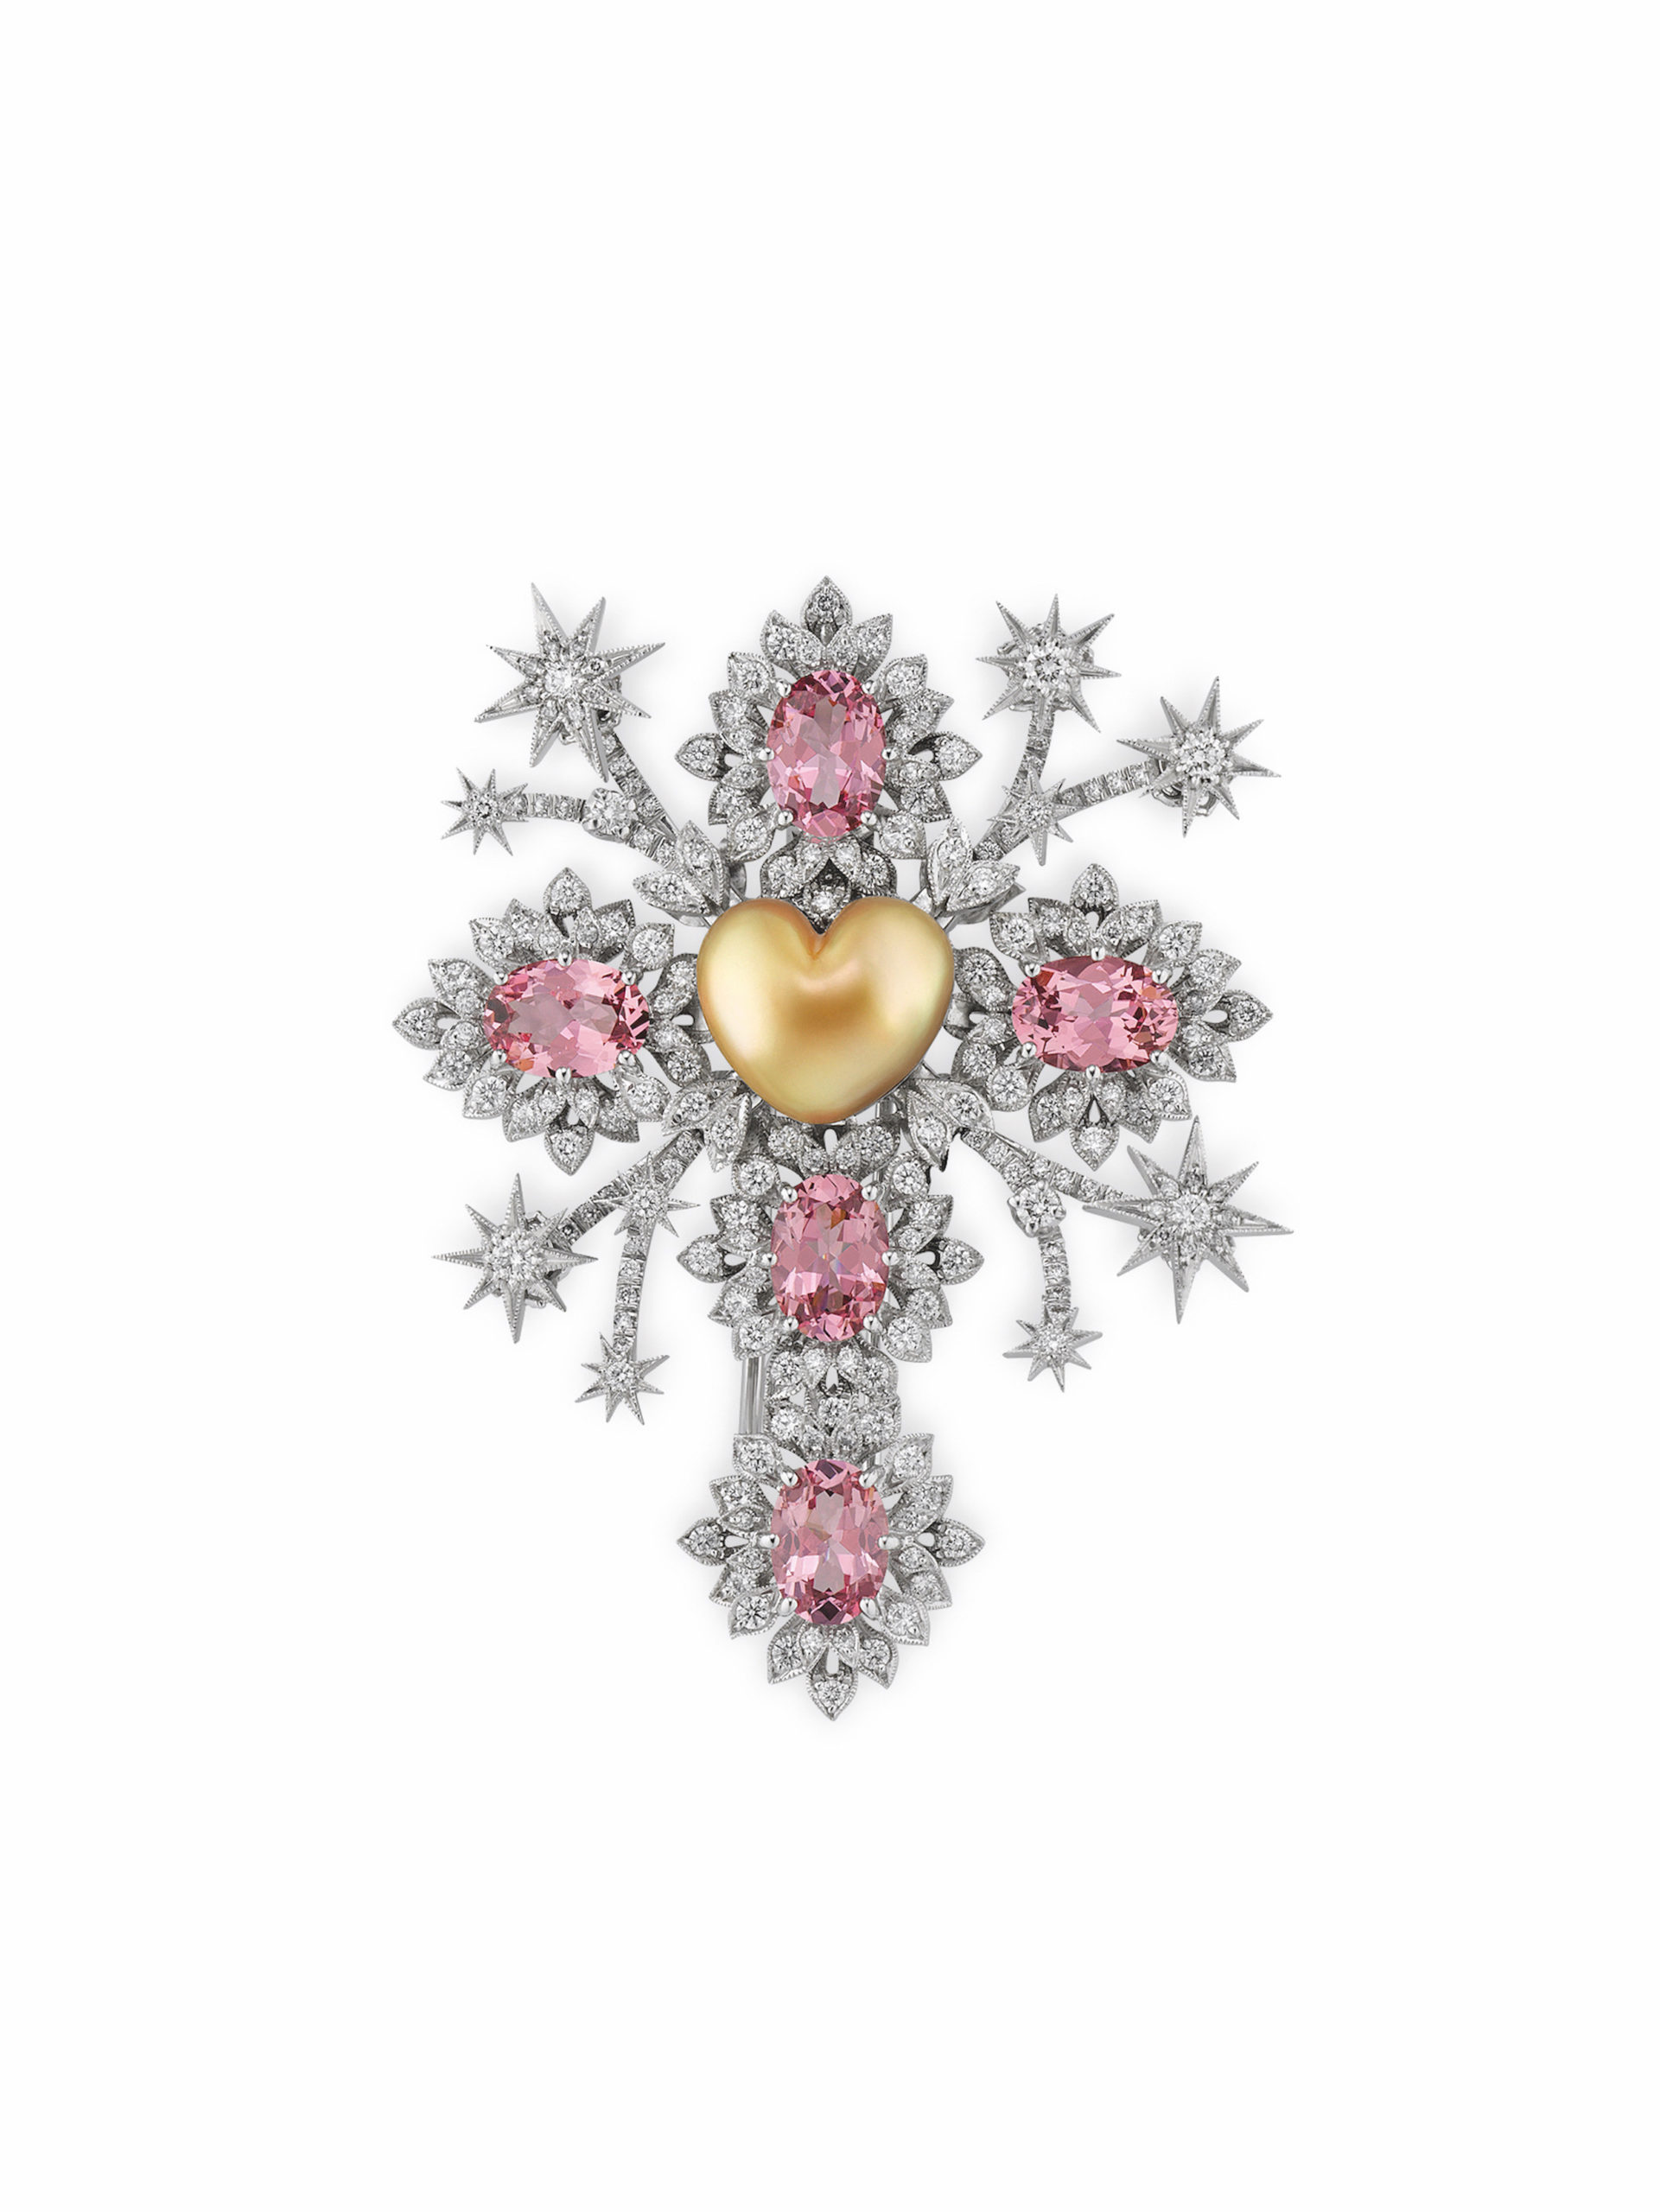 legendloves: Hortus Deliciarum, Gucci's new high jewellery collection —  Hashtag Legend